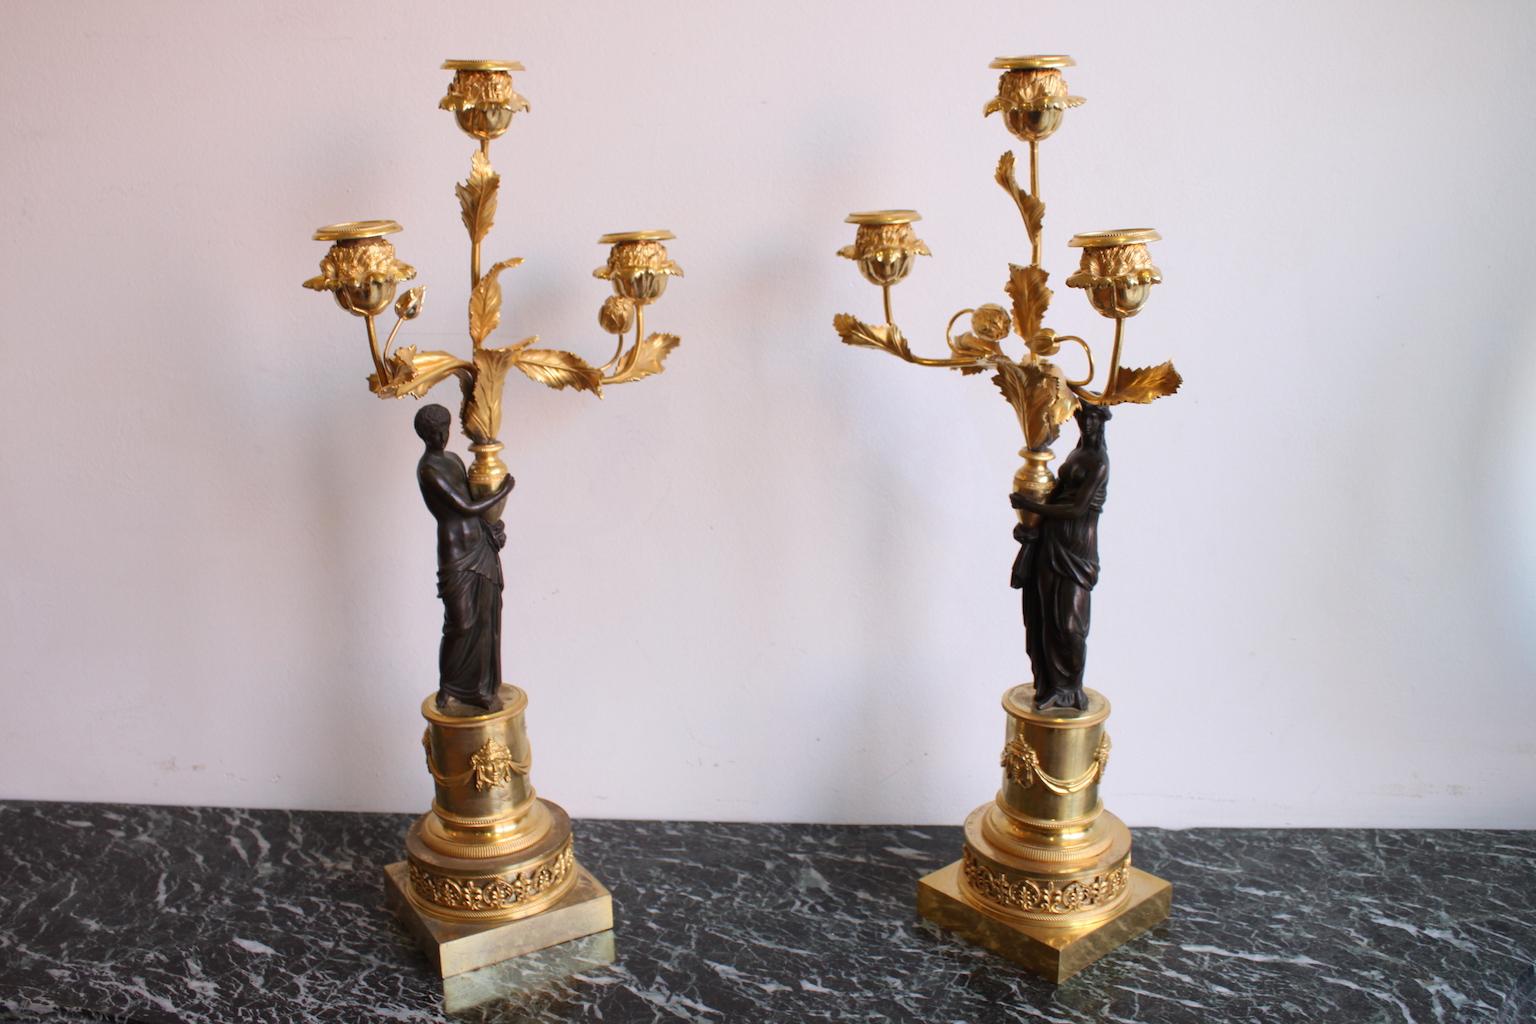 Pair of Louis XVI candlesticks in bronze gilded with mercury, representing antique woman and man, and decorated with masks and roses. Gold patina with mercury and medal patina.
In a perfect state.
Dimensions: Total height 50cm. Total width 23cm.